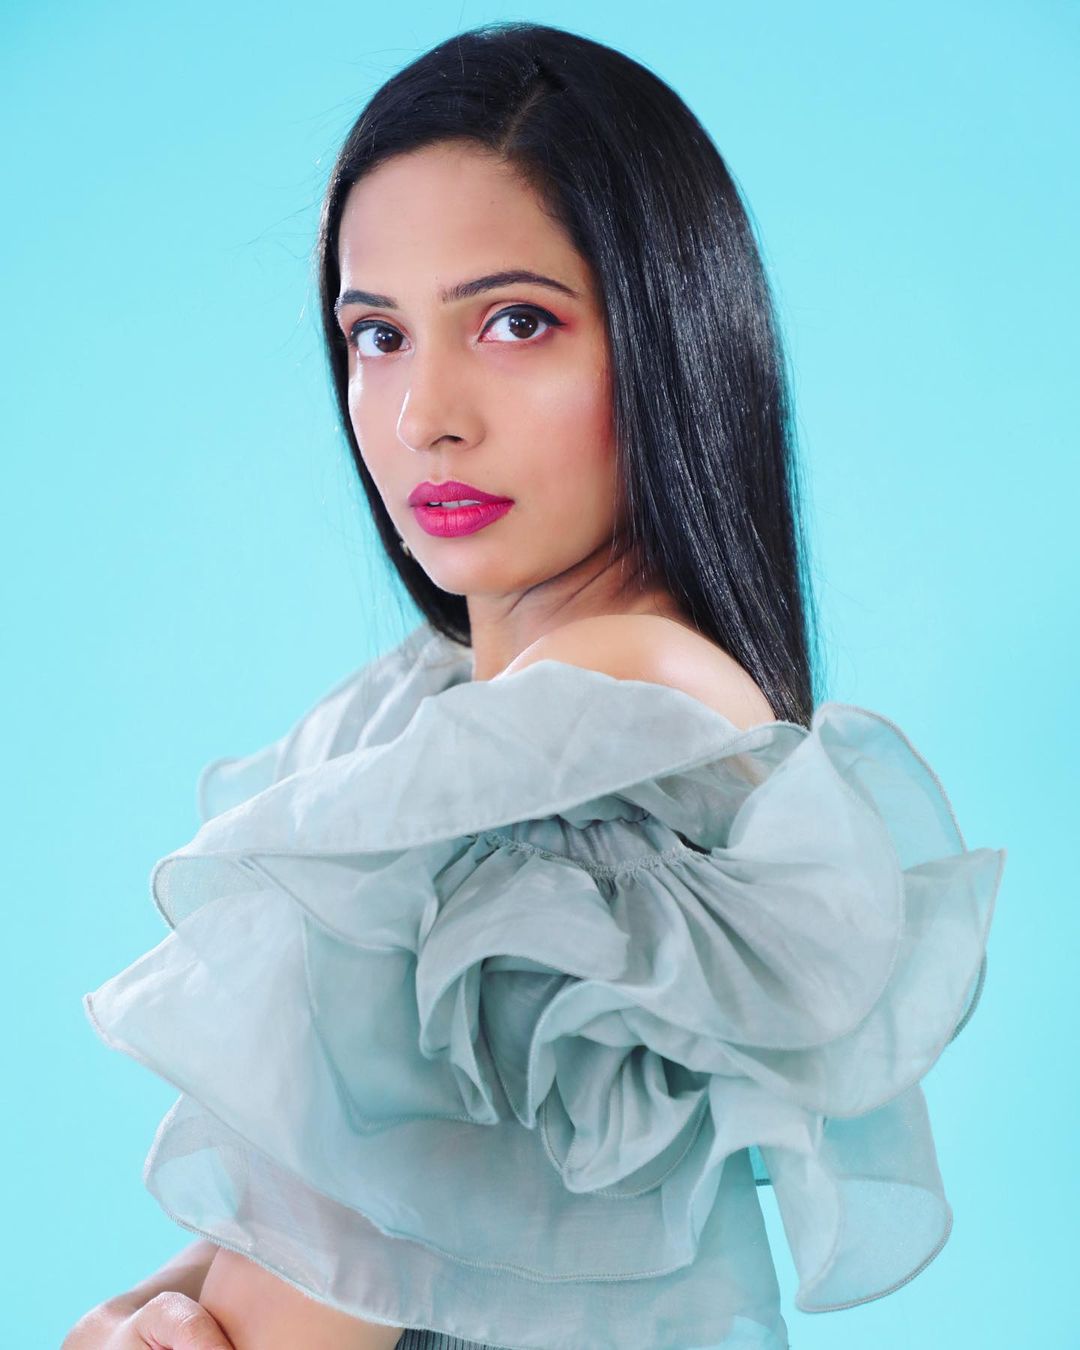 Shruti Arjun Anand YouTube, Instagram, Facebook, Age, Husband, Children, Early Life, Body Measurements, Success Story, and Net Worth